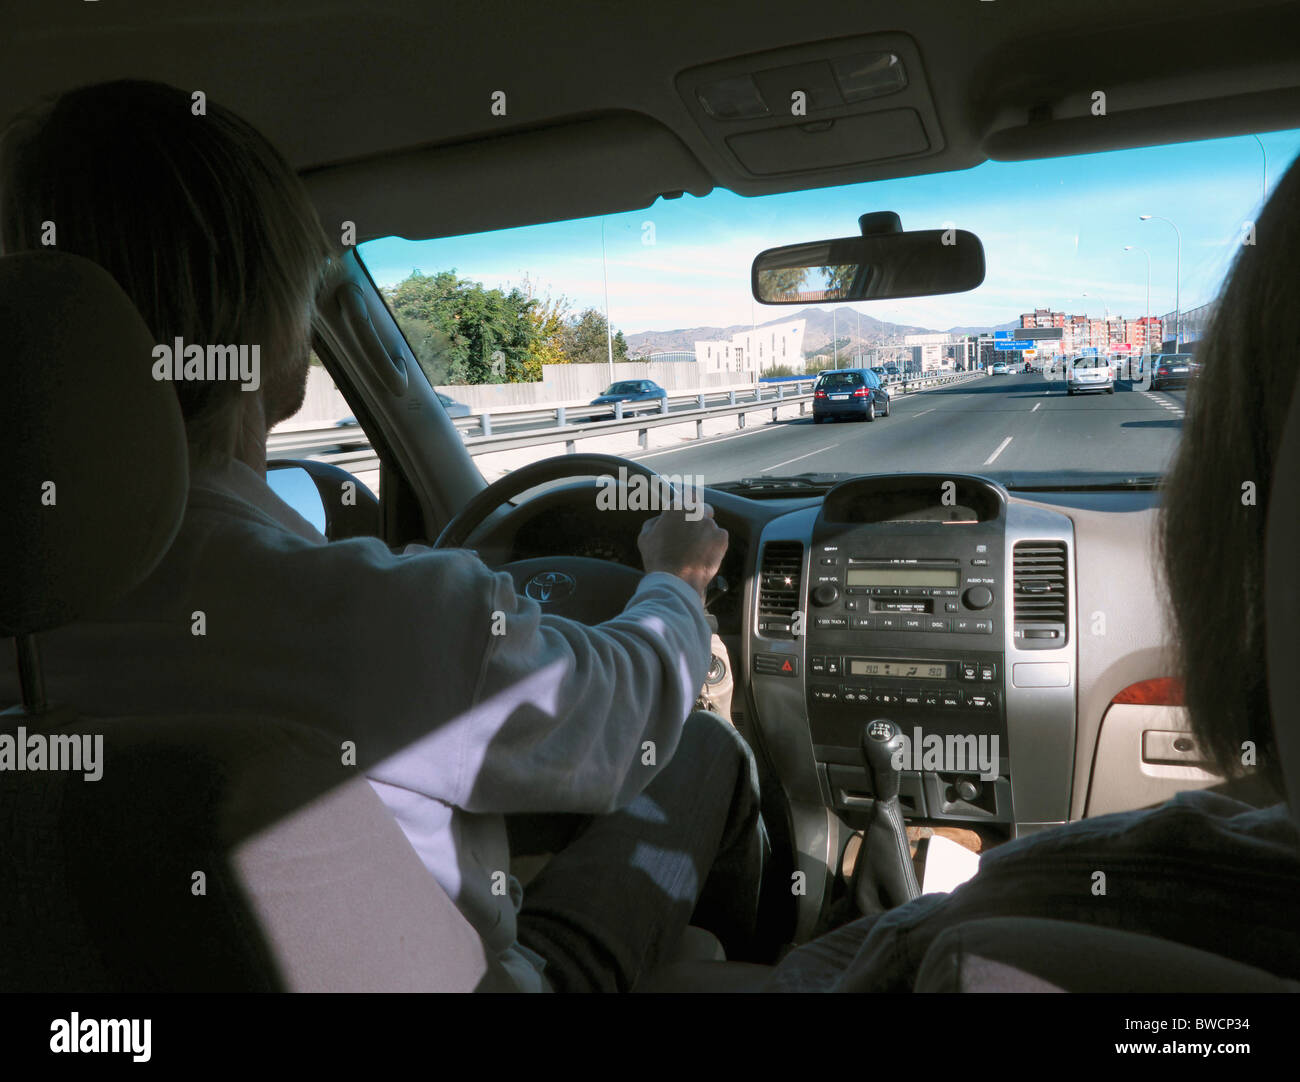 Outskirts of Malaga, Spain seen from inside vehicle with driver and passenger. Stock Photo